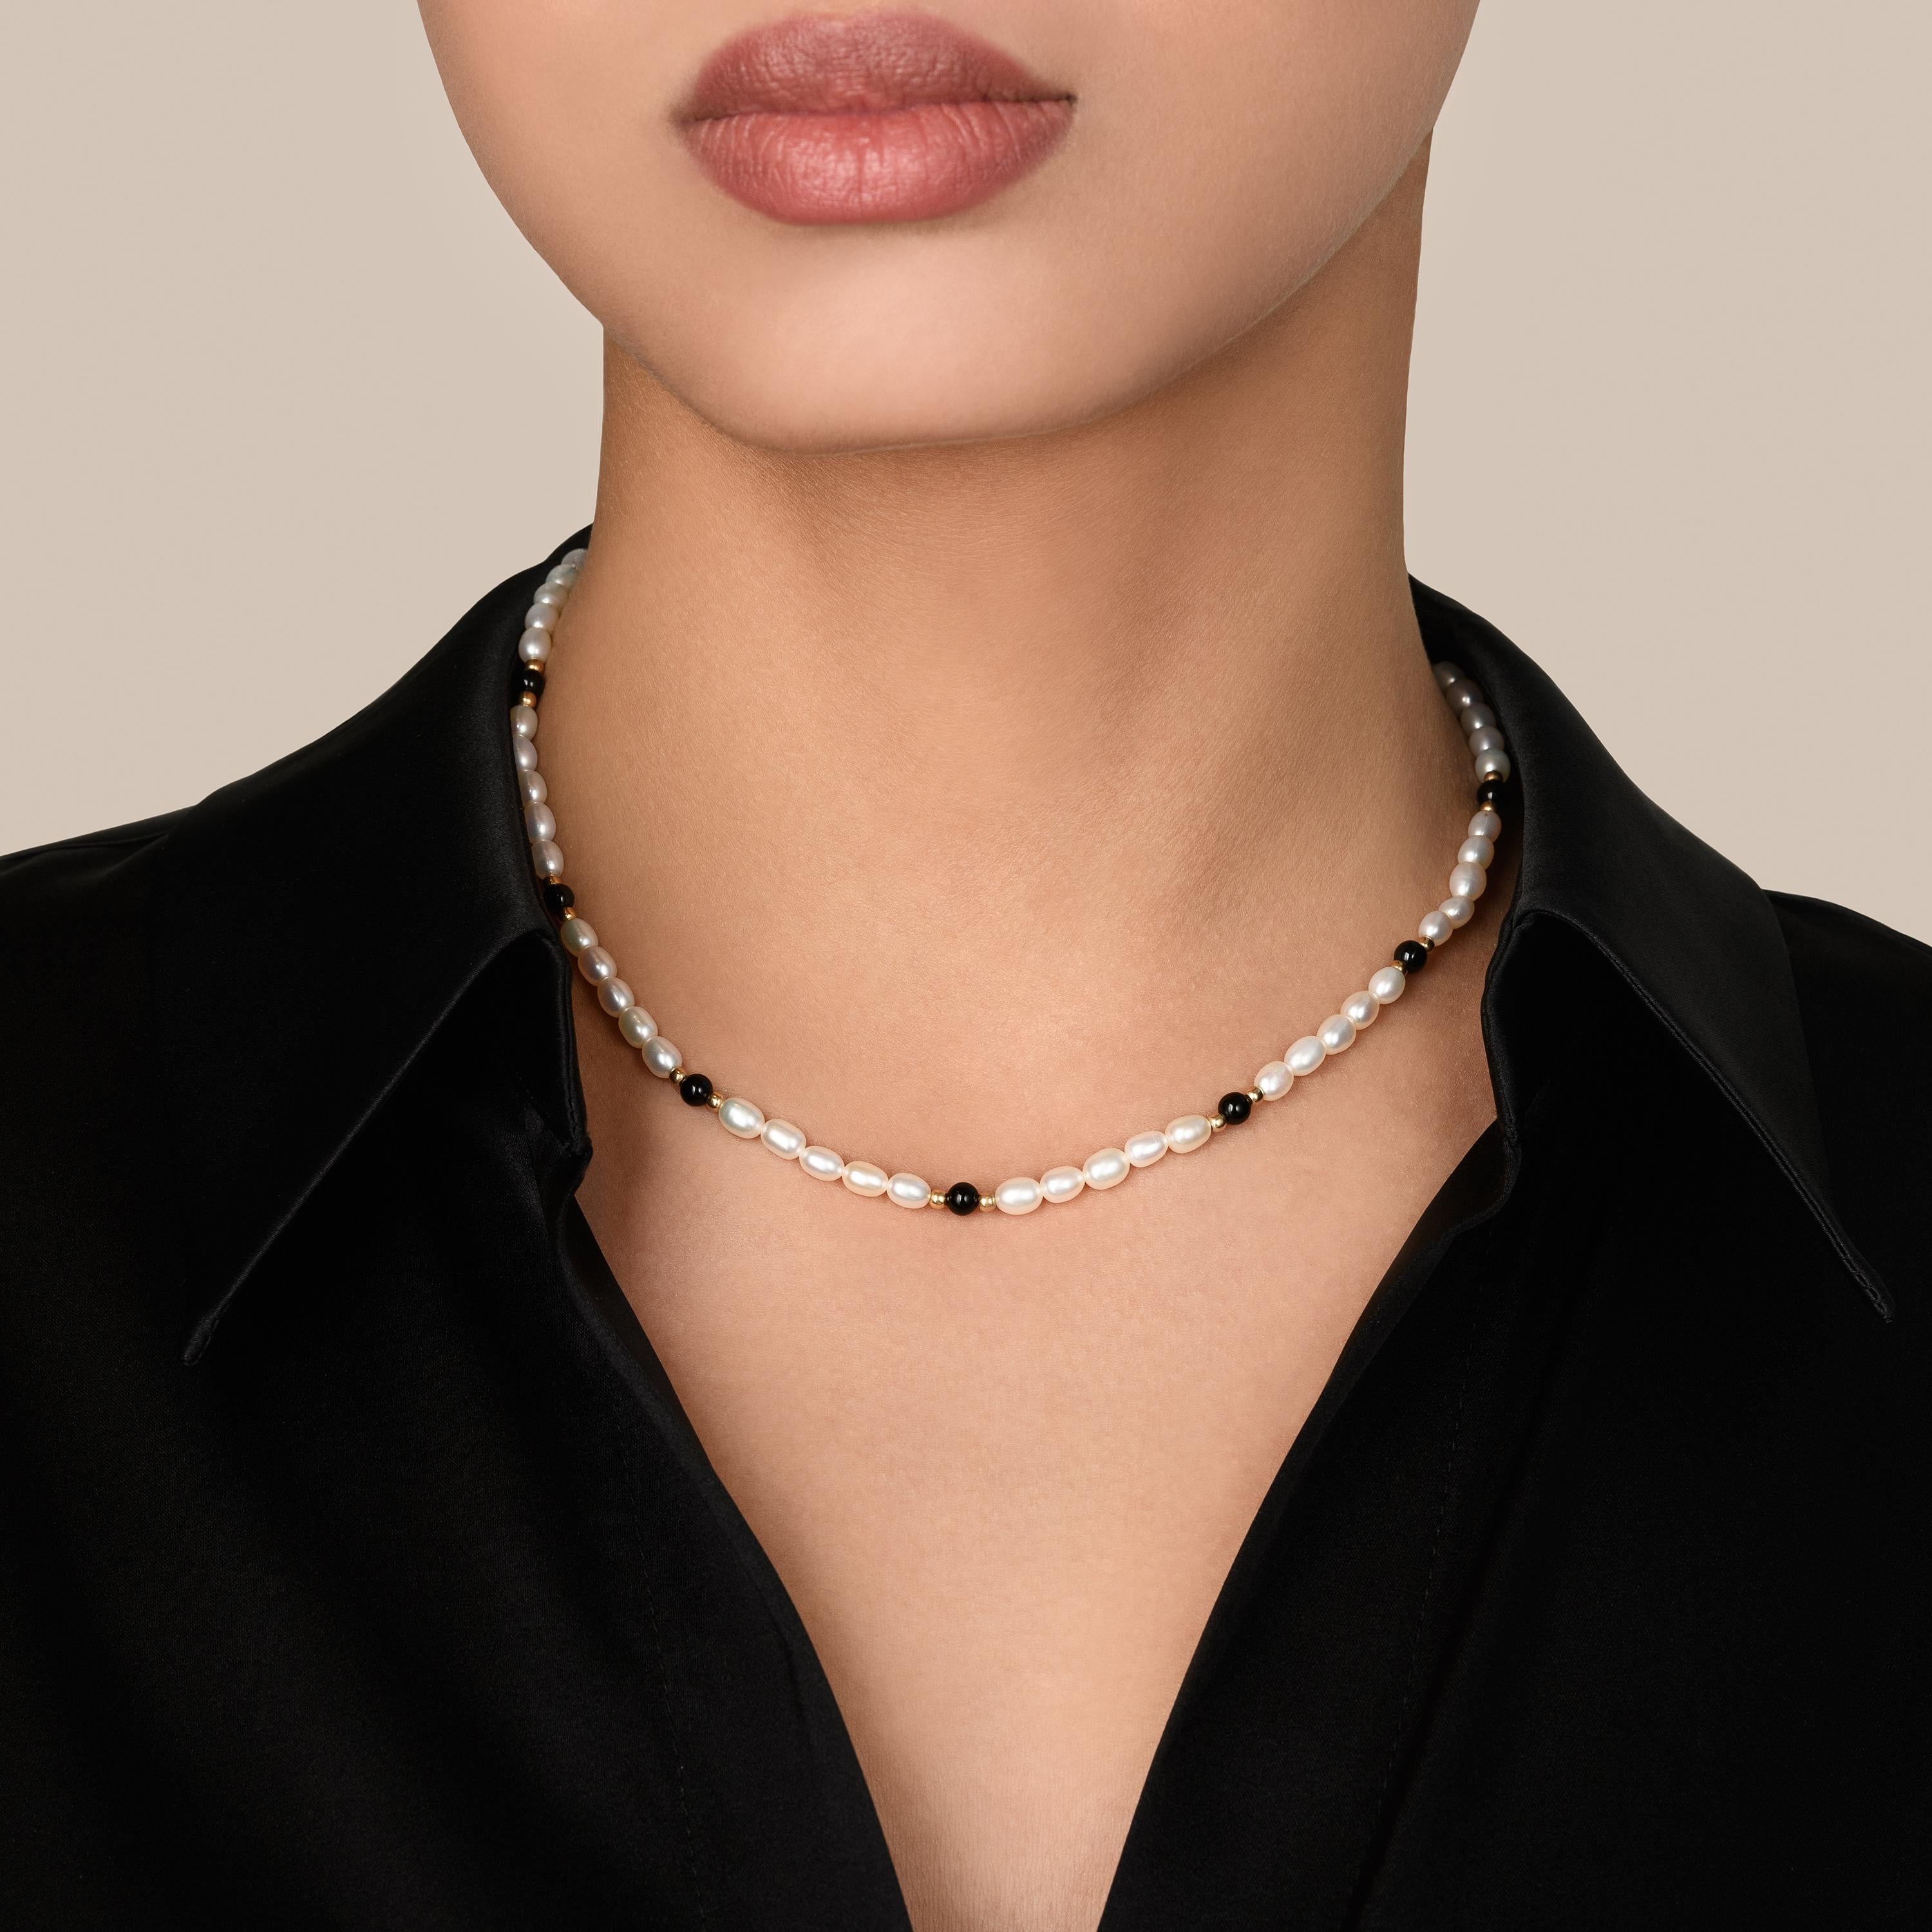 Experience the captivating allure of our Pearl Delight with Onyx. The Pearl, Onyx, and 18k Gold Plated Stainless Steel Beads Necklace. This exquisite piece harmoniously combines the timeless elegance of pearls with the sleek sophistication of onyx.